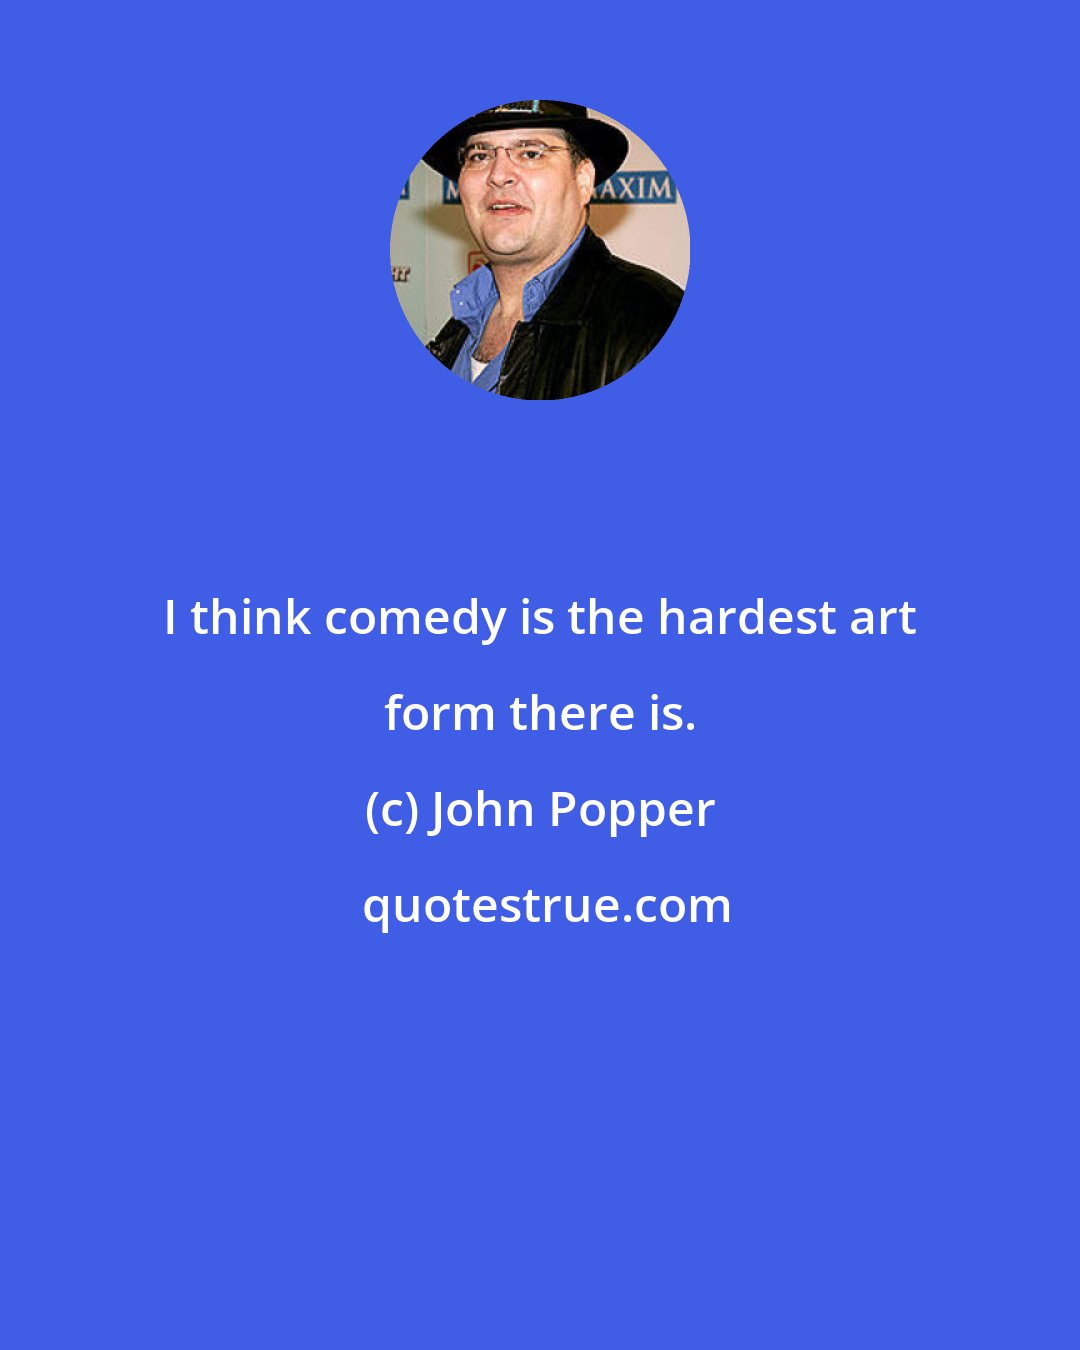 John Popper: I think comedy is the hardest art form there is.